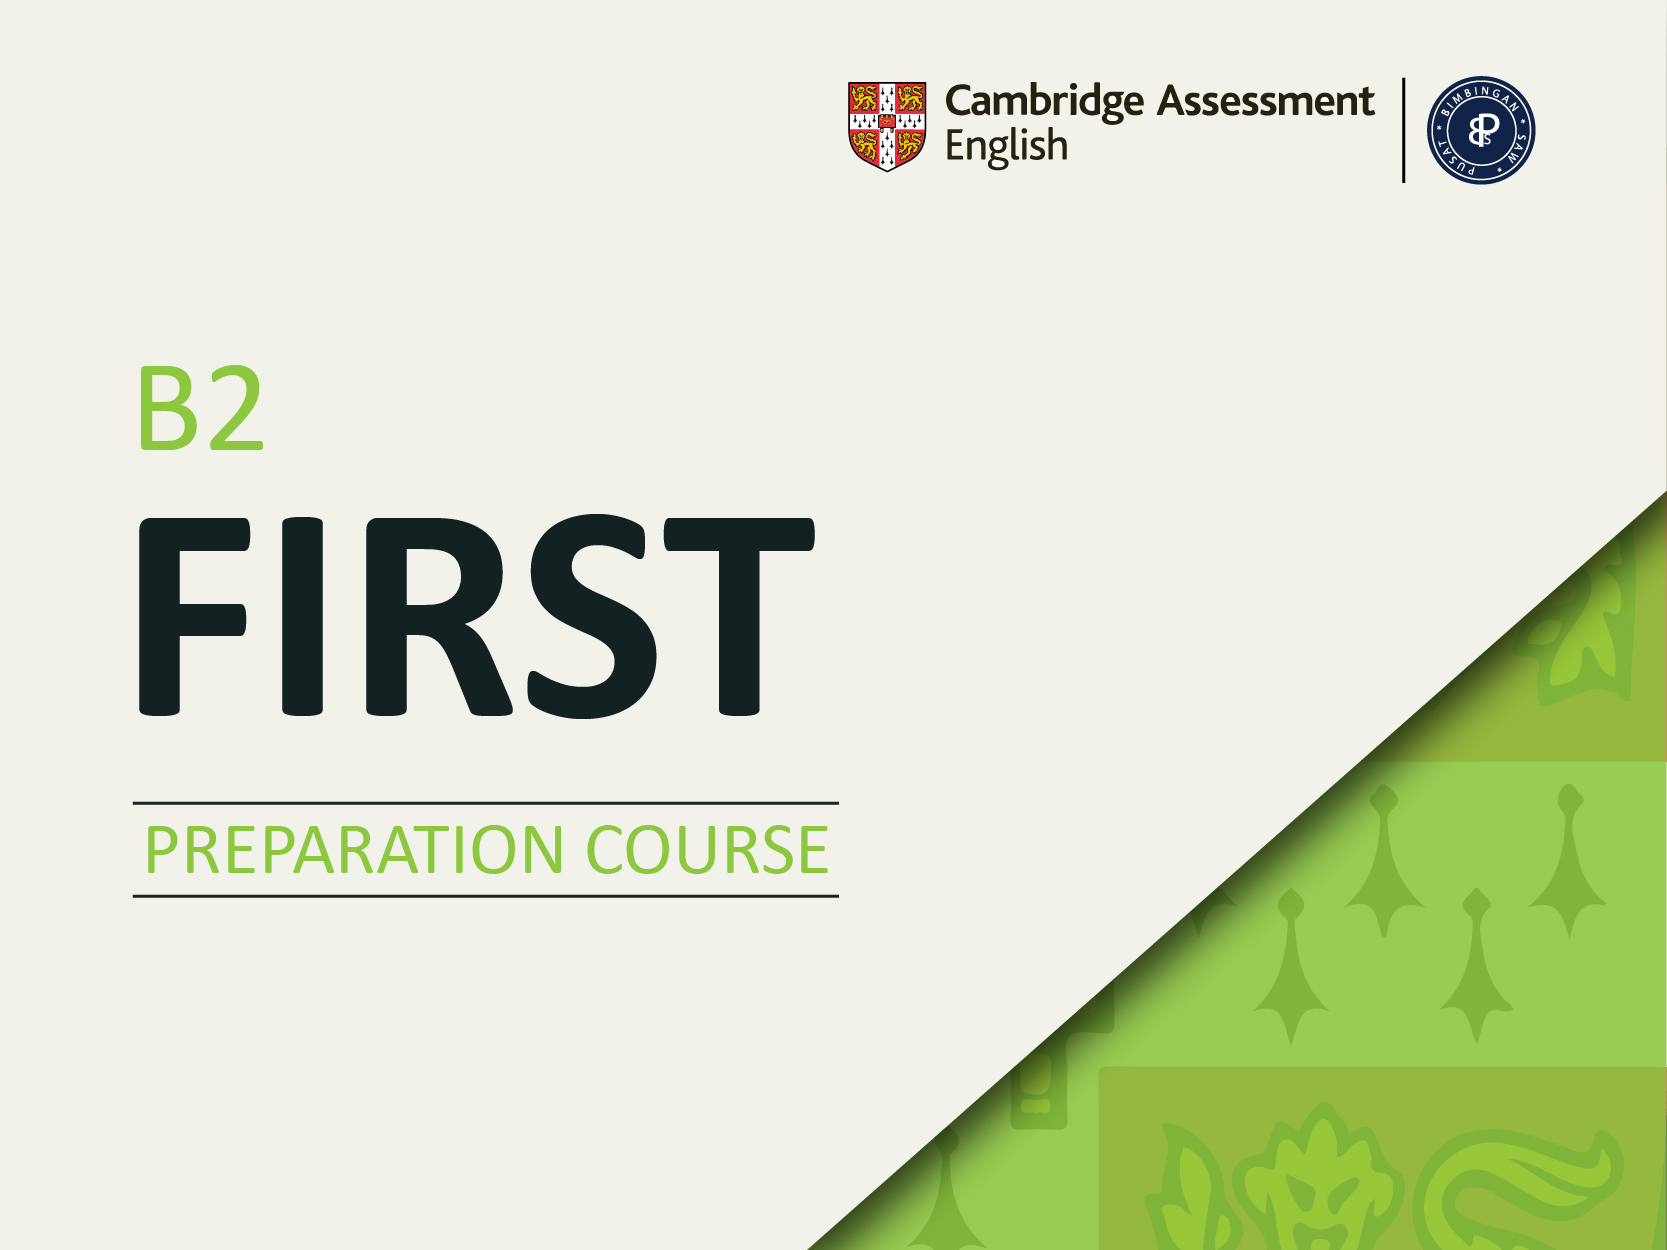 Cambridge English | B2 First - 11 months course